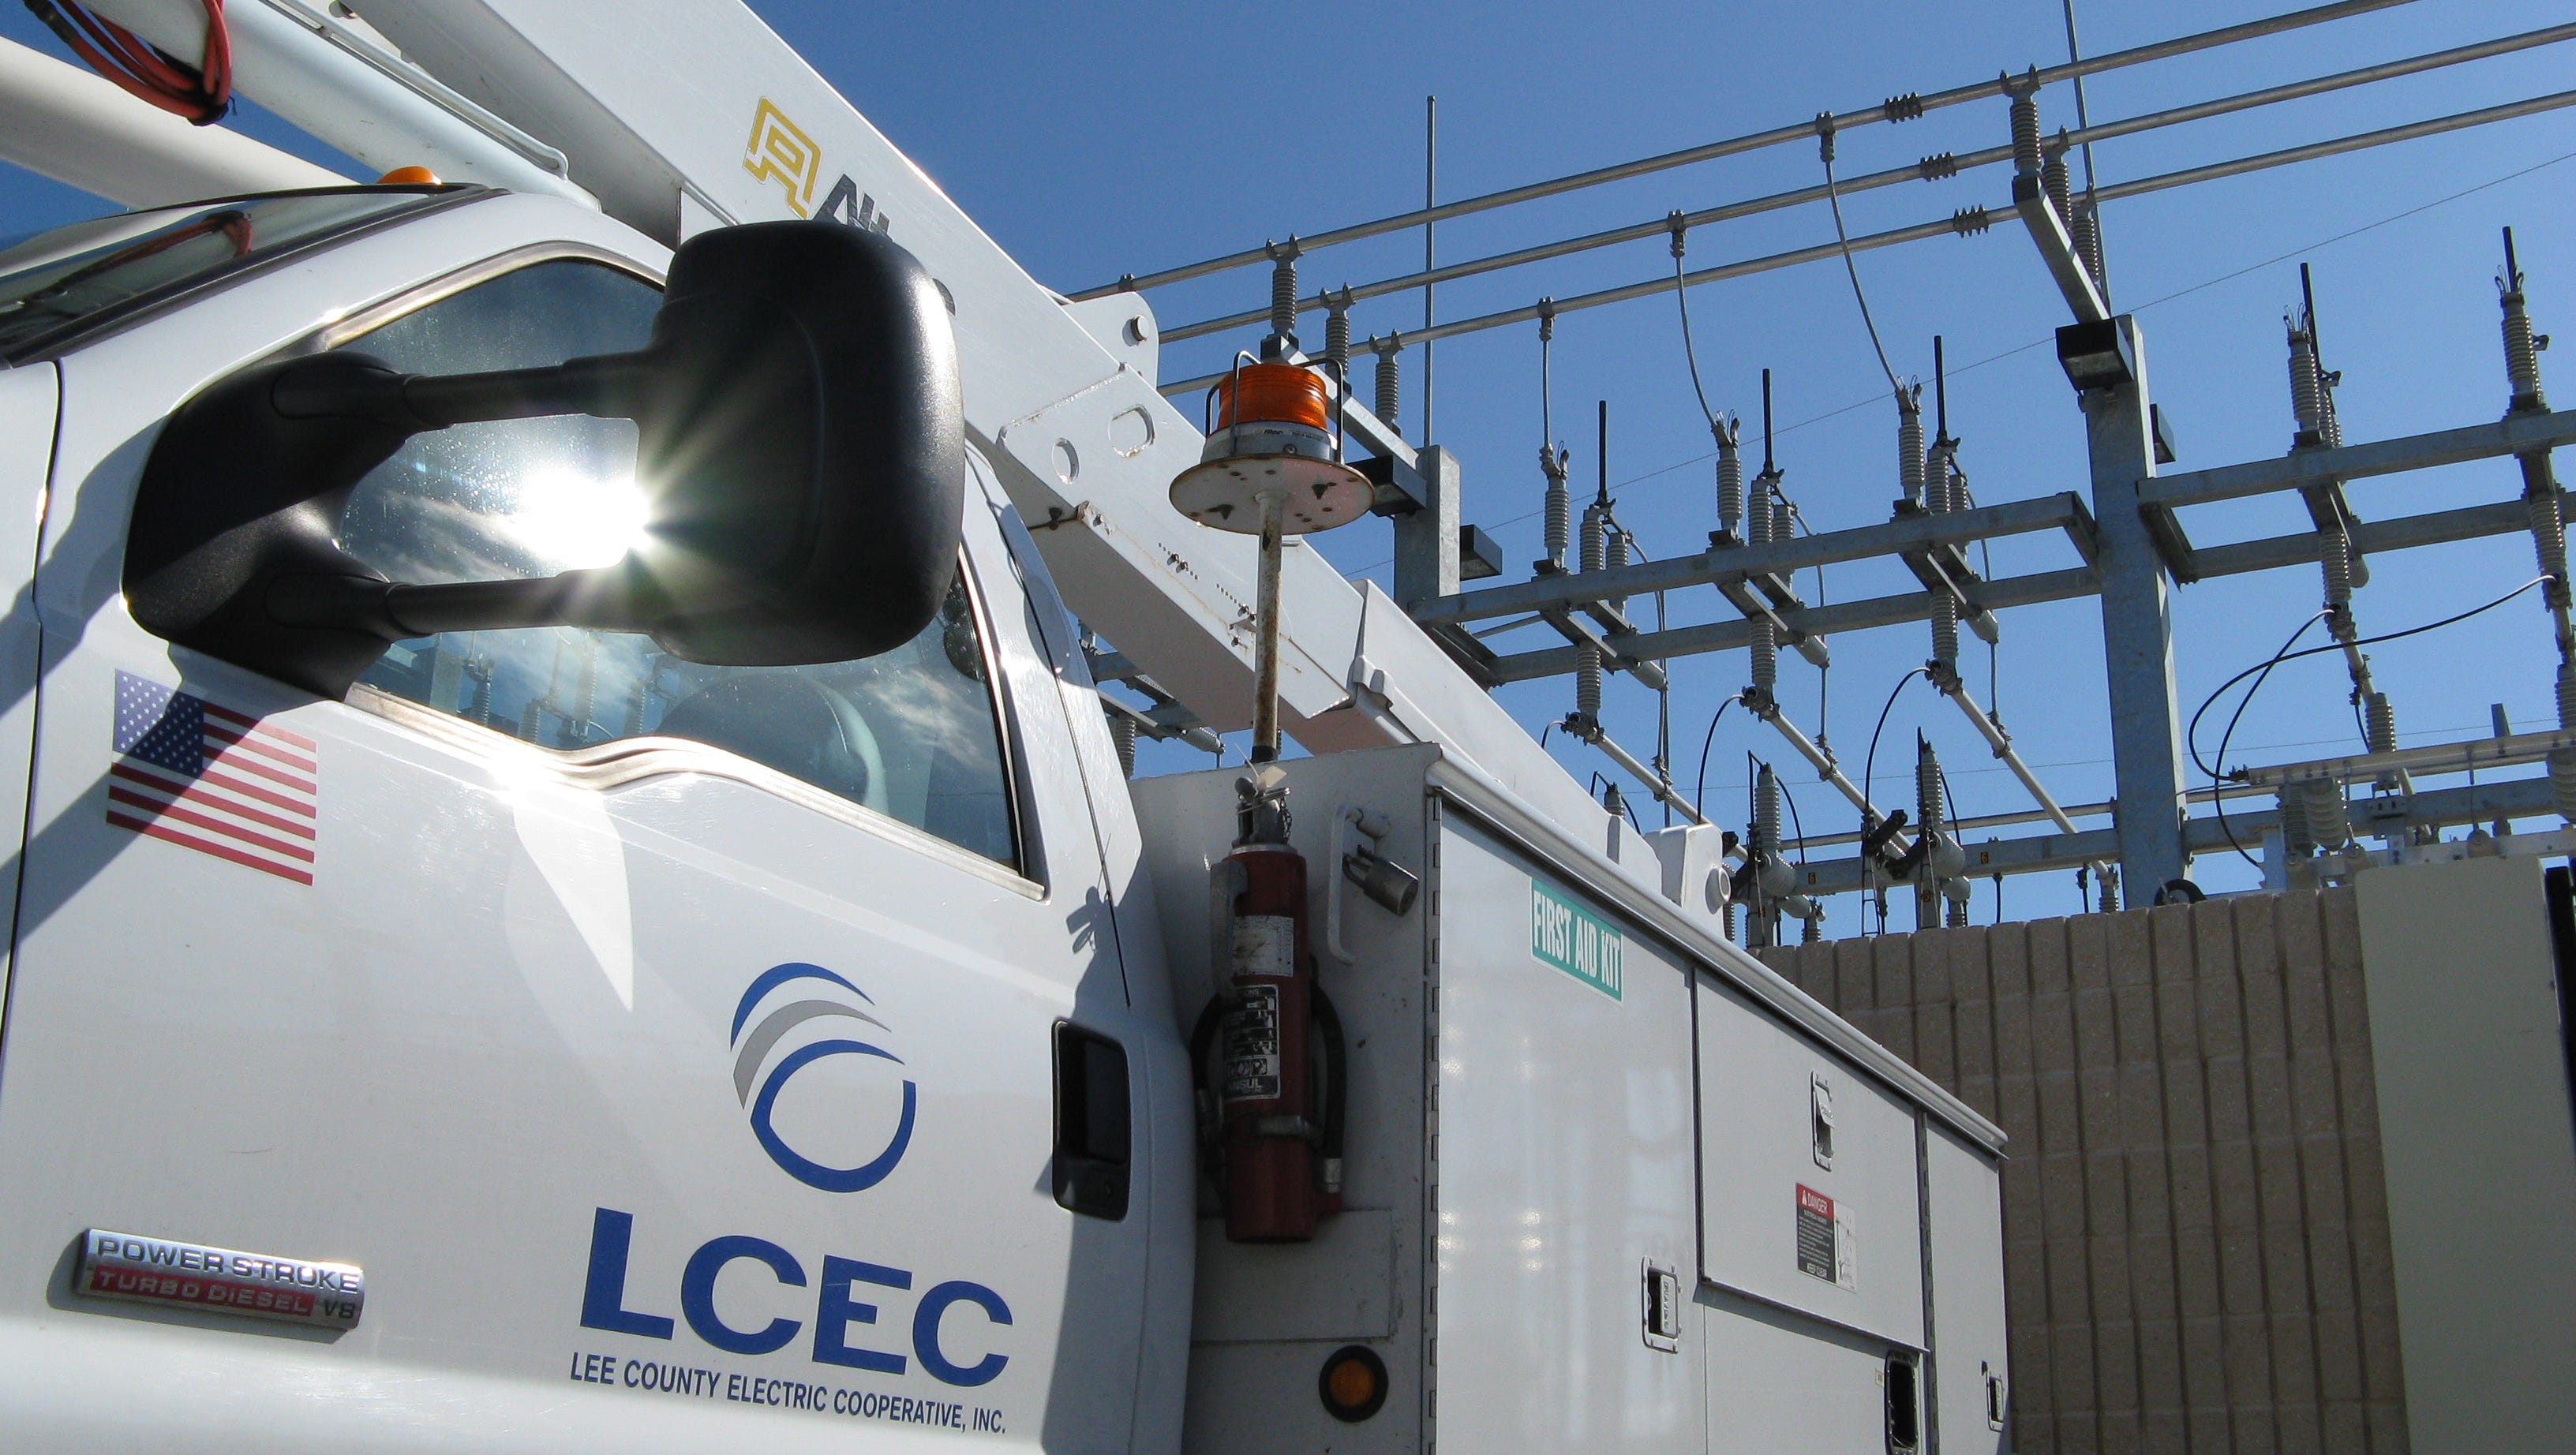 LCEC power outage: What caused Monday's power outage?